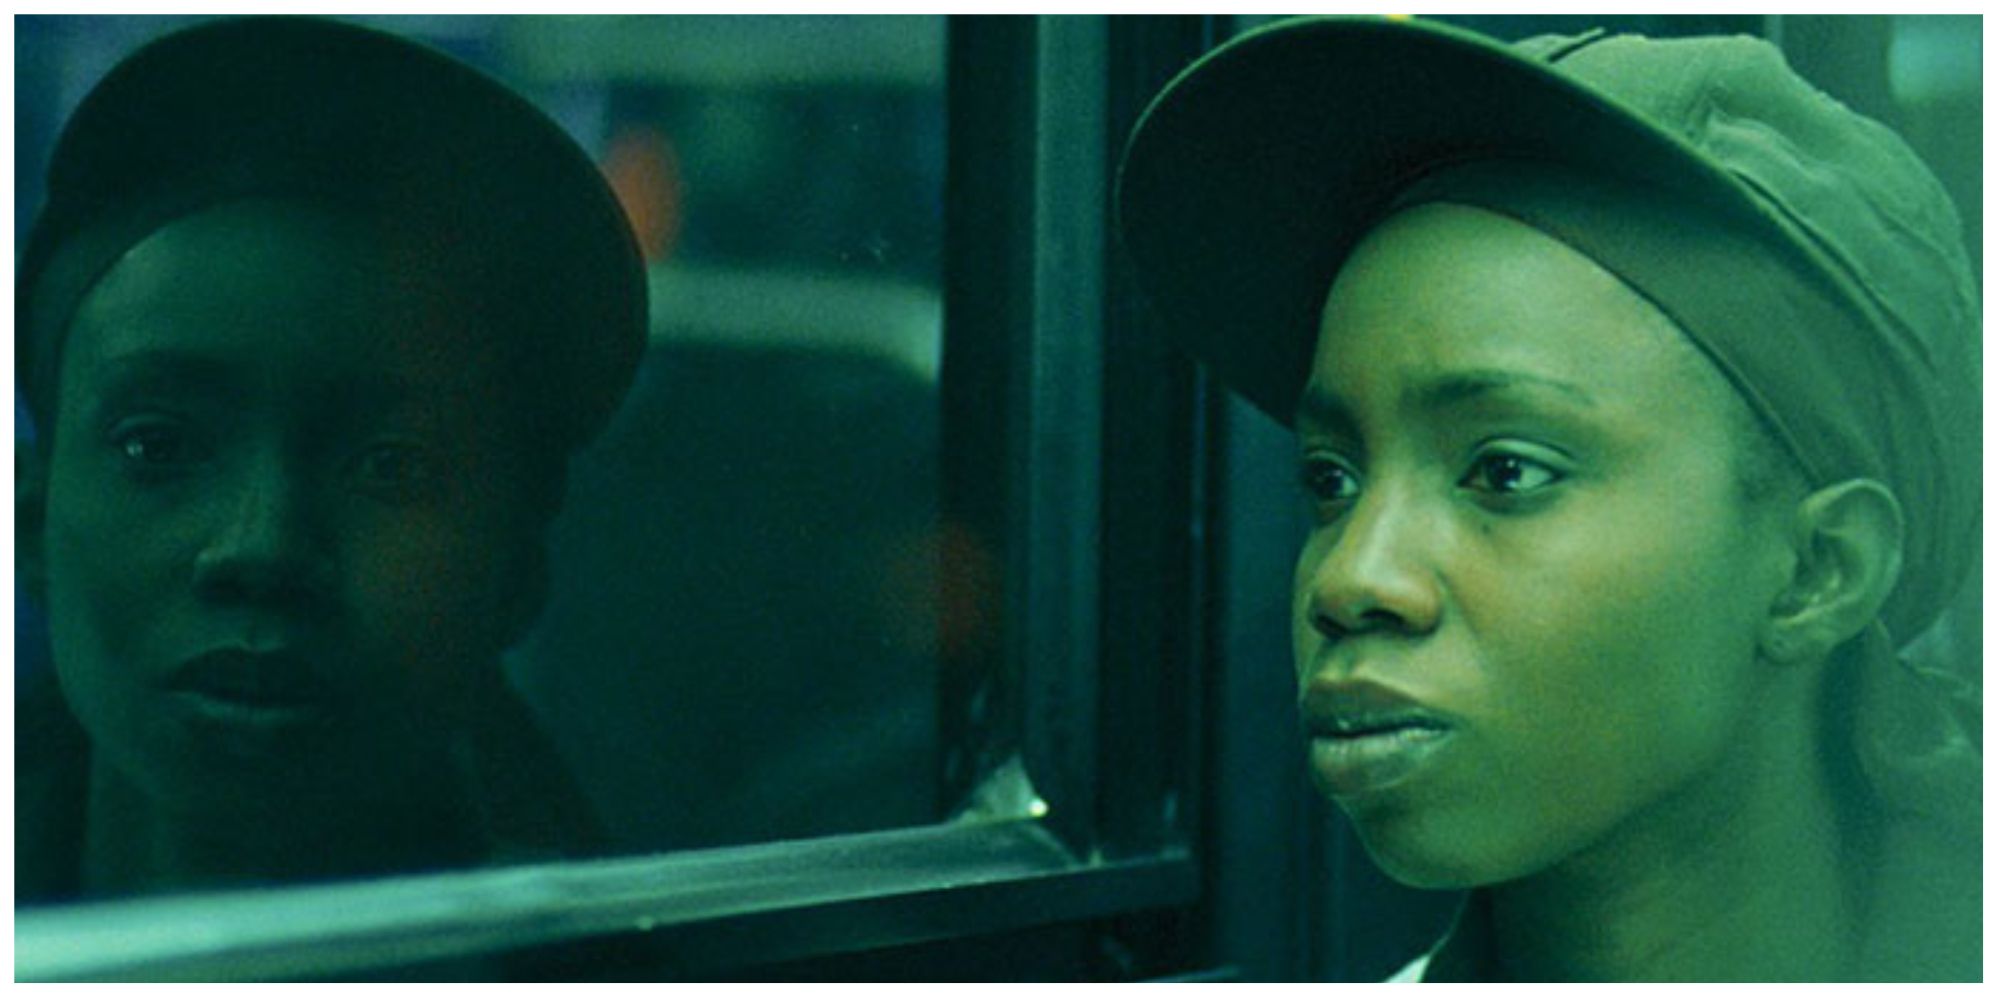 Alike in Pariah sat on the bus looking out of her window. Her reflection is looking straight at the camera.